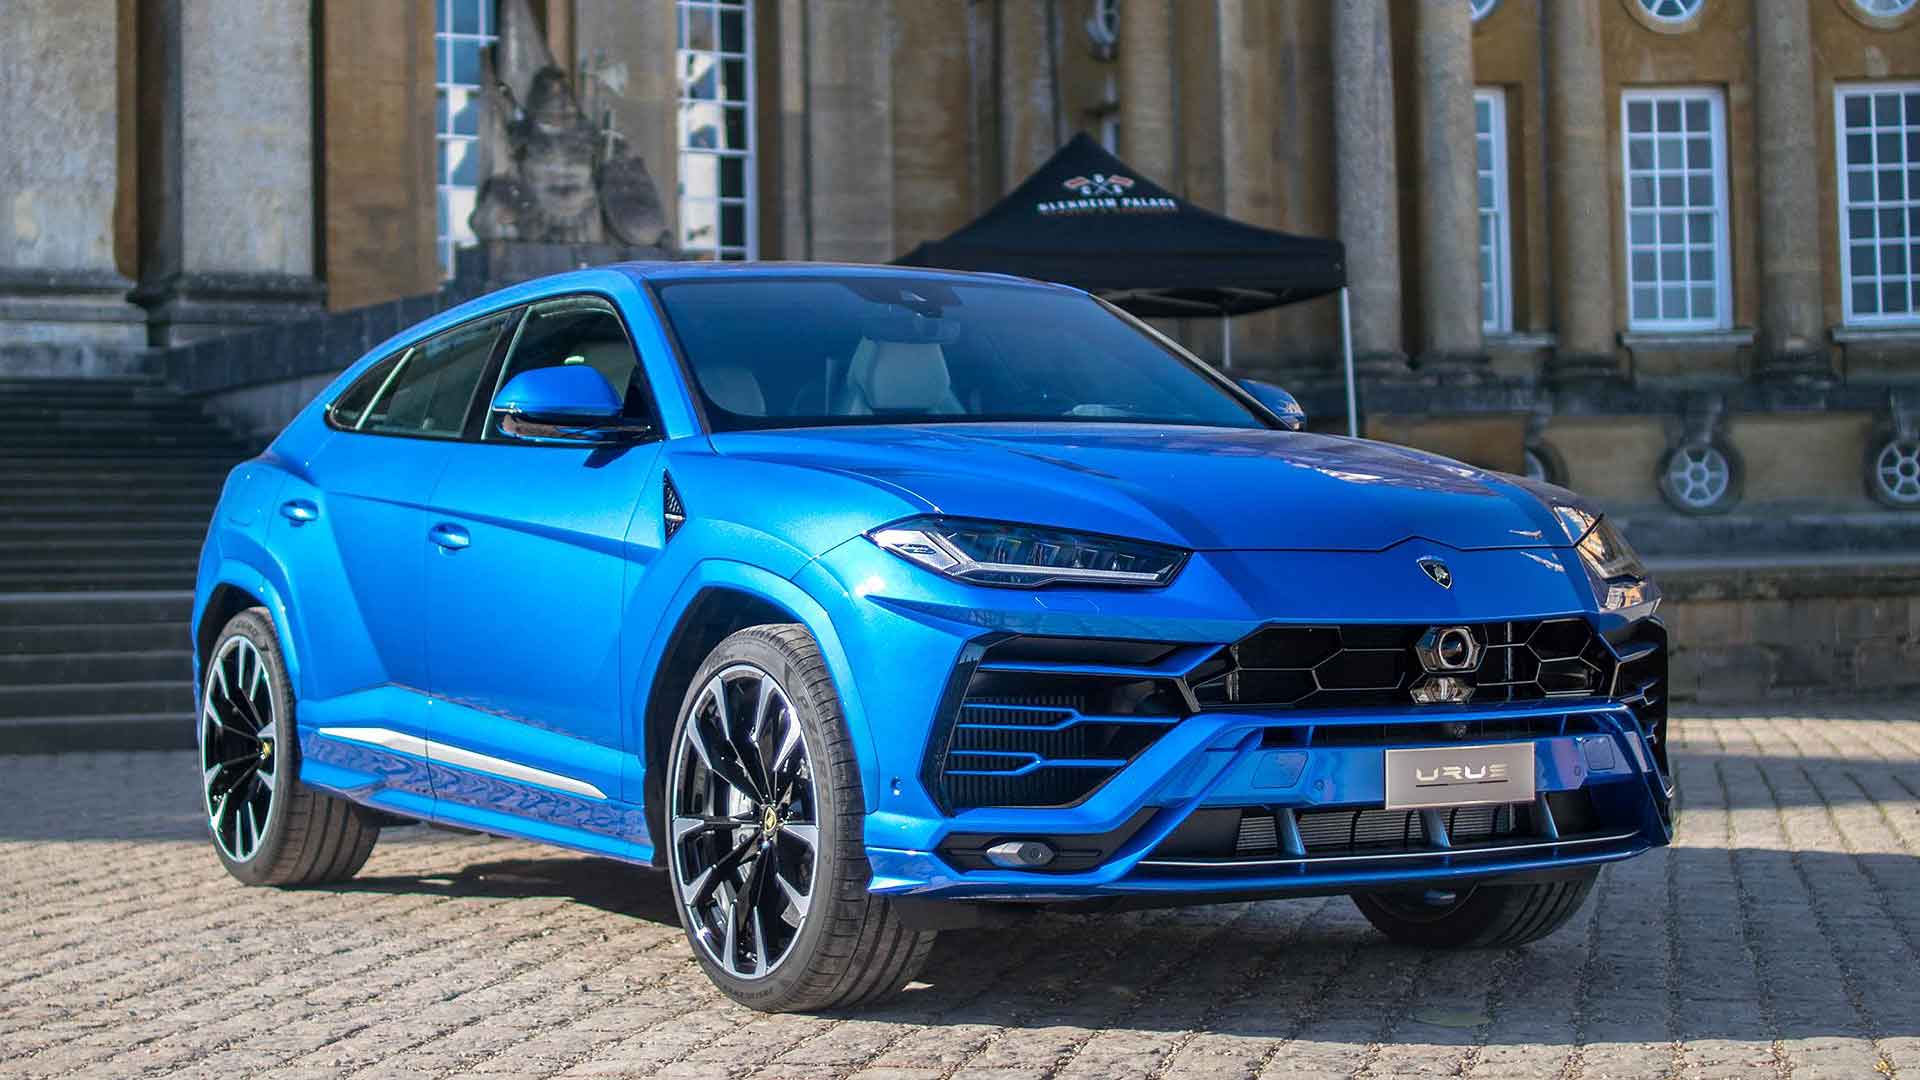 Lamborghini sales boom as 6 in 10 cars sold is an SUV